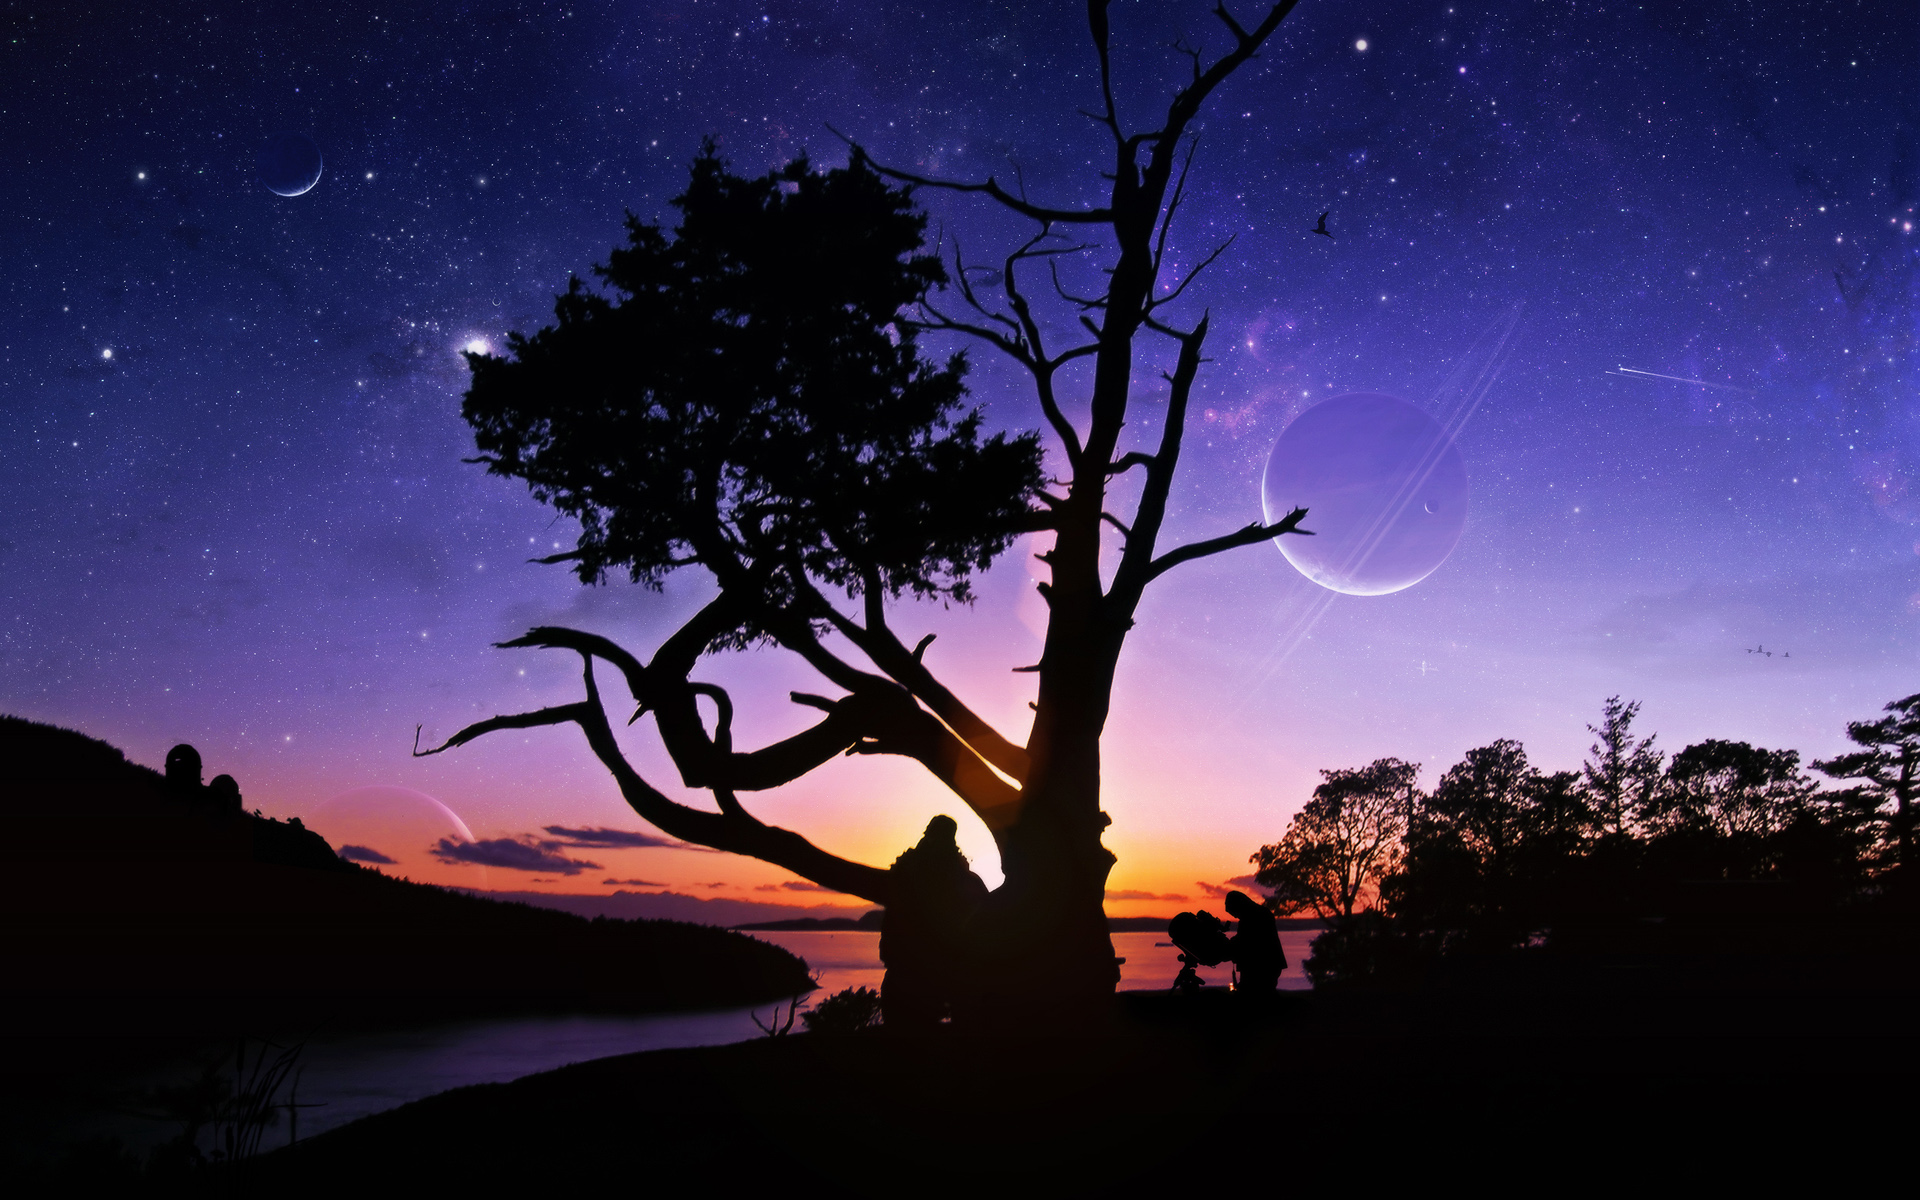 Starry night sky with a majestic tree standing against a planet backdrop.